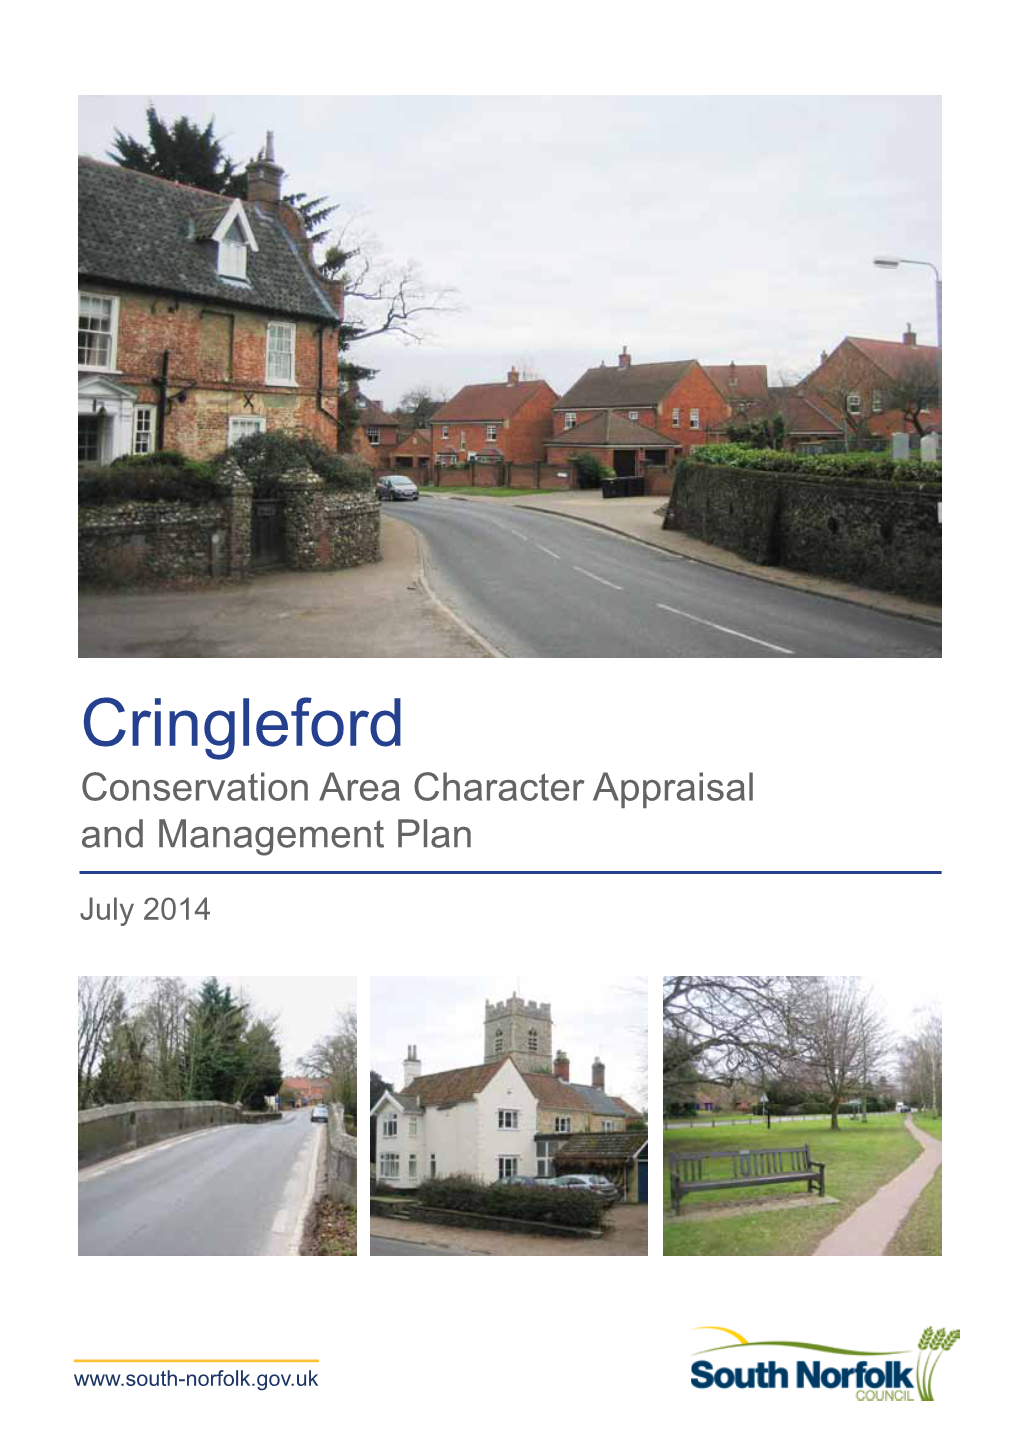 Cringleford Conservation Area Character Appraisal and Management Plan